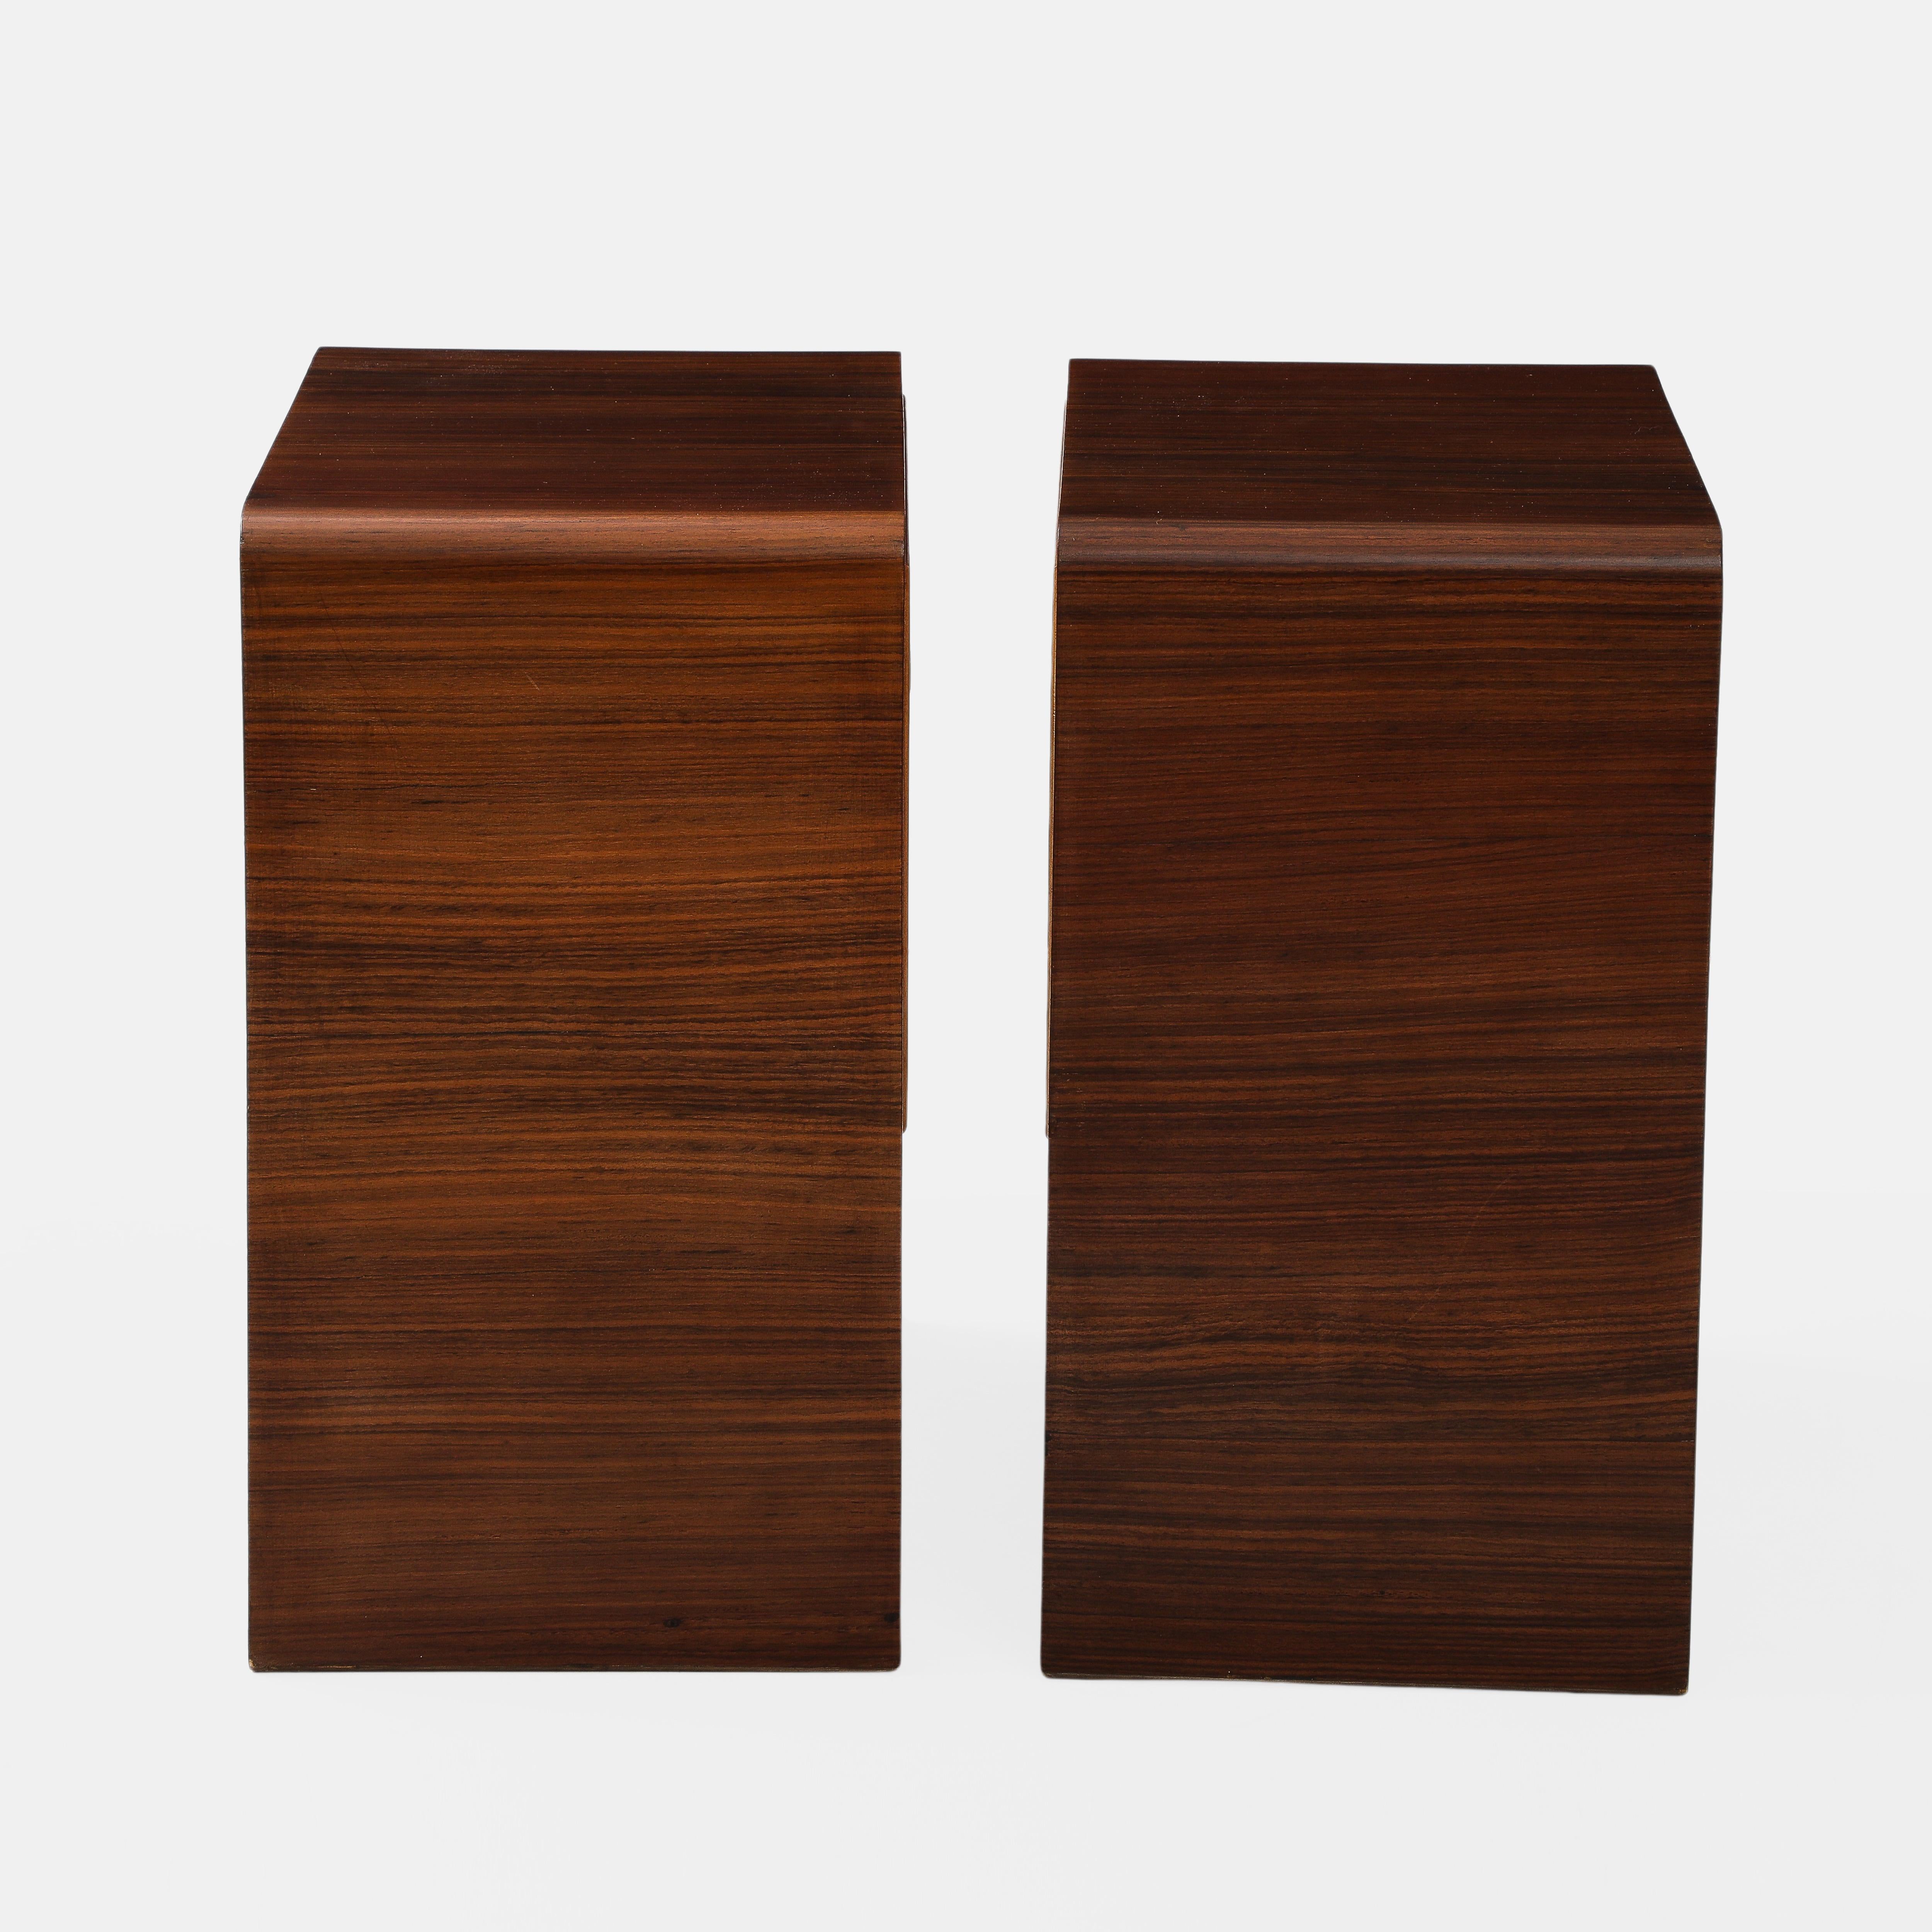 1950s Pair of Rosewood and Birchwood Nightstands or Bedside Tables In Good Condition For Sale In New York, NY